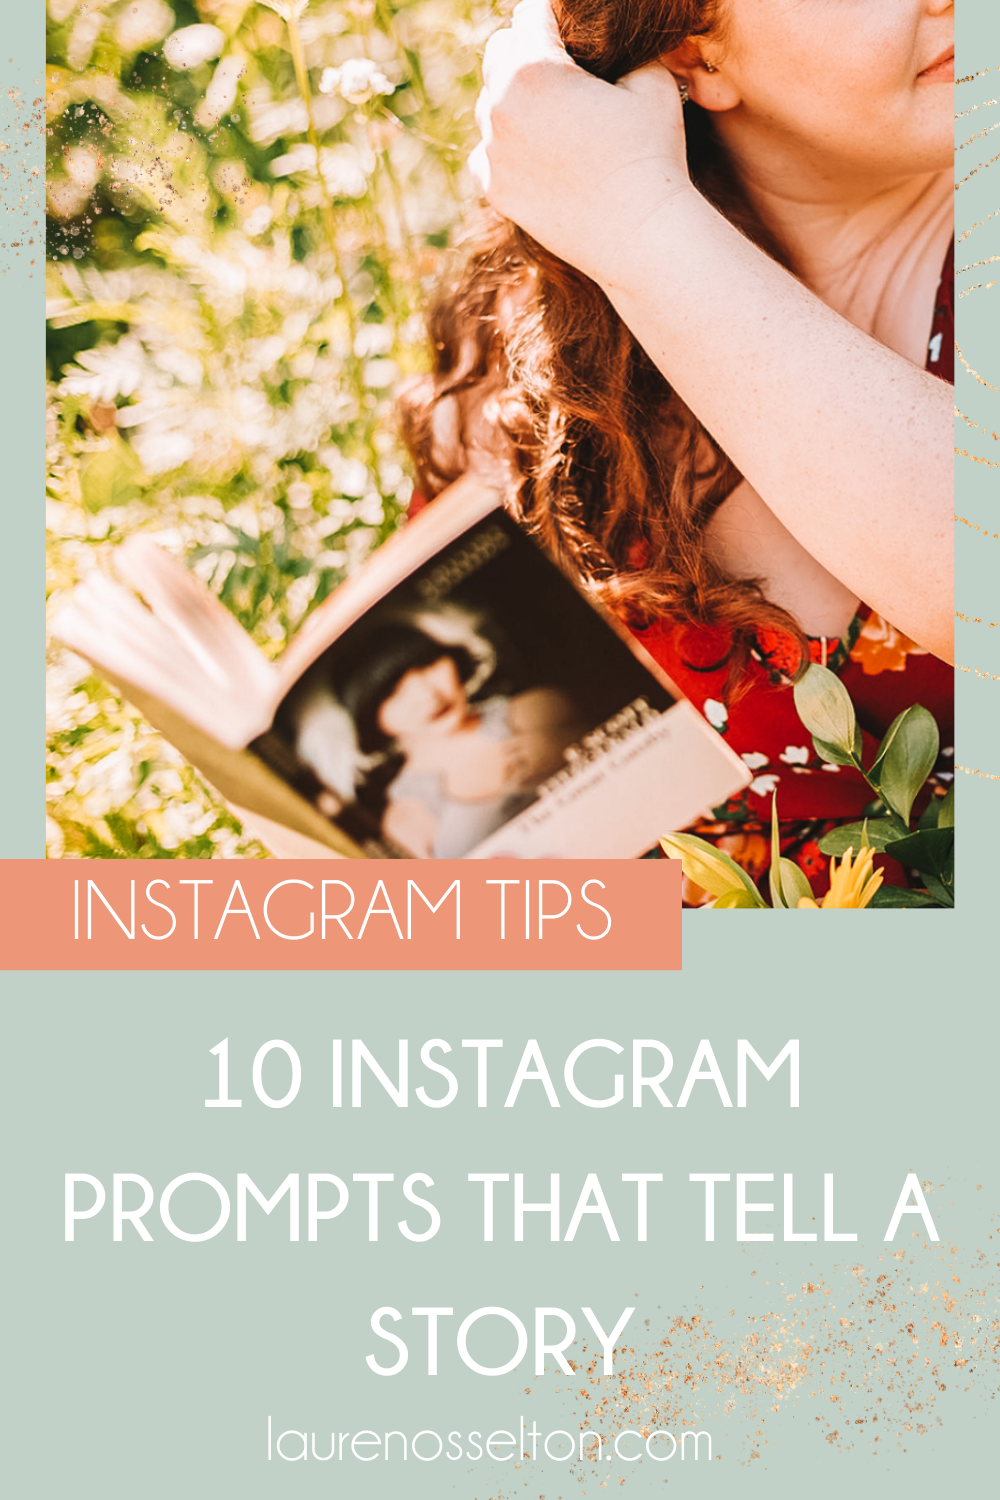 10 Instagram Prompts That Tell a Story | Lauren Osselton. Not sure what to post on Instagram? Try these 10 Instagram prompts to use storytelling in your social media content and your captions so you can connect with your ideal audience. Never run out of content ideas again with these Instagram caption ideas designed to help you create engaging social media content for your audience.